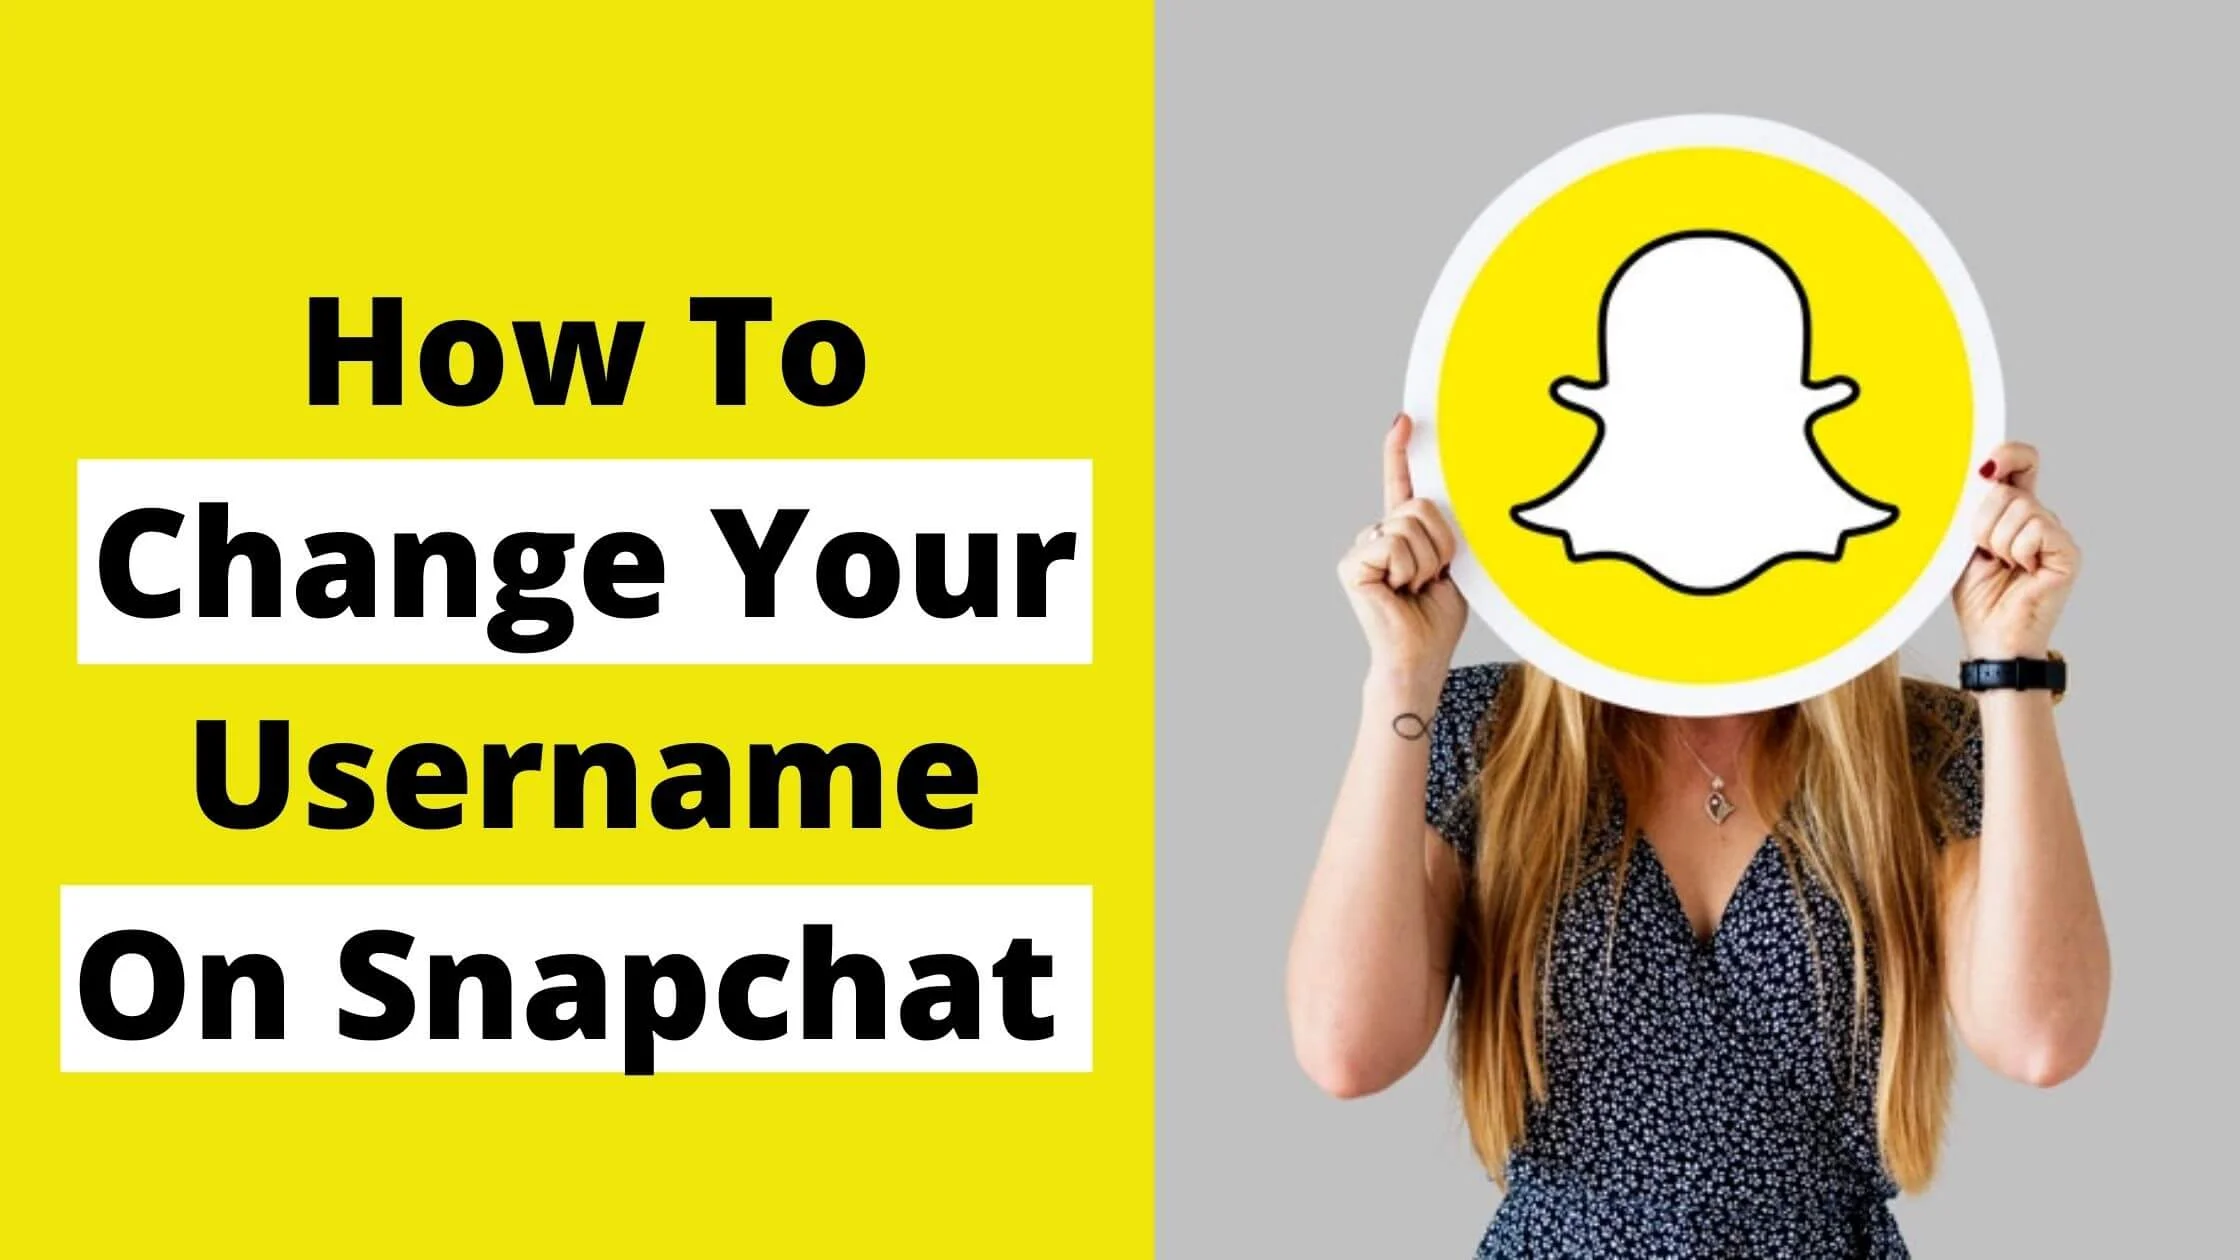 How To Change Your Username On Snapchat